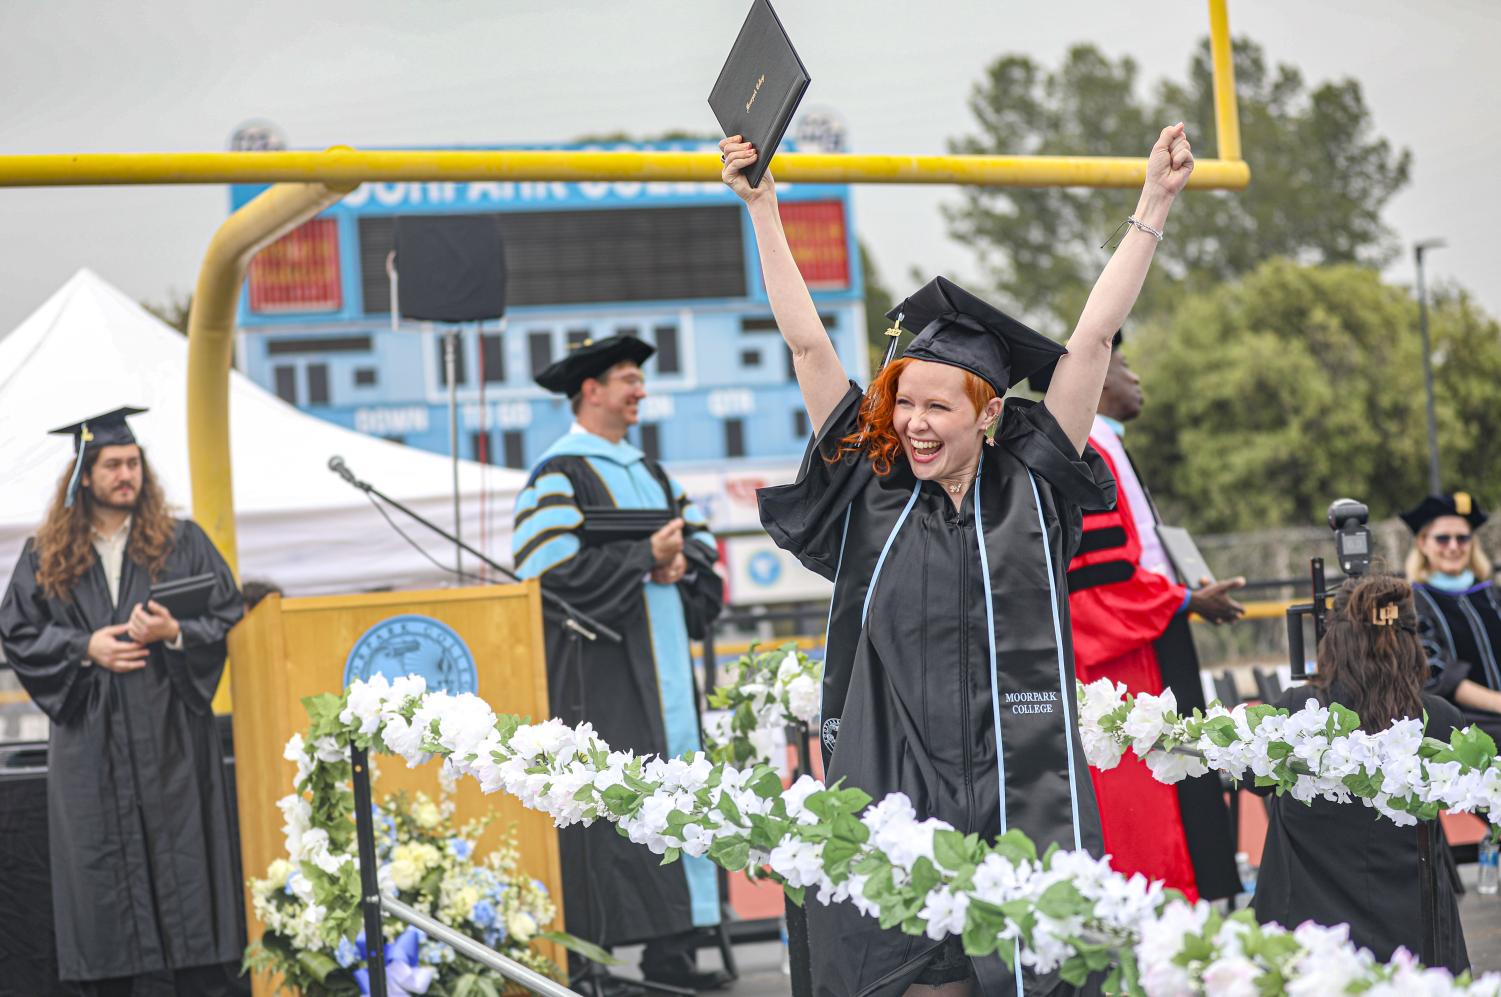 A 2023 graduate raises their arms in celebration after receiving their diploma on May 19, during Moorpark College's graduation ceremony in Moorpark, CA.